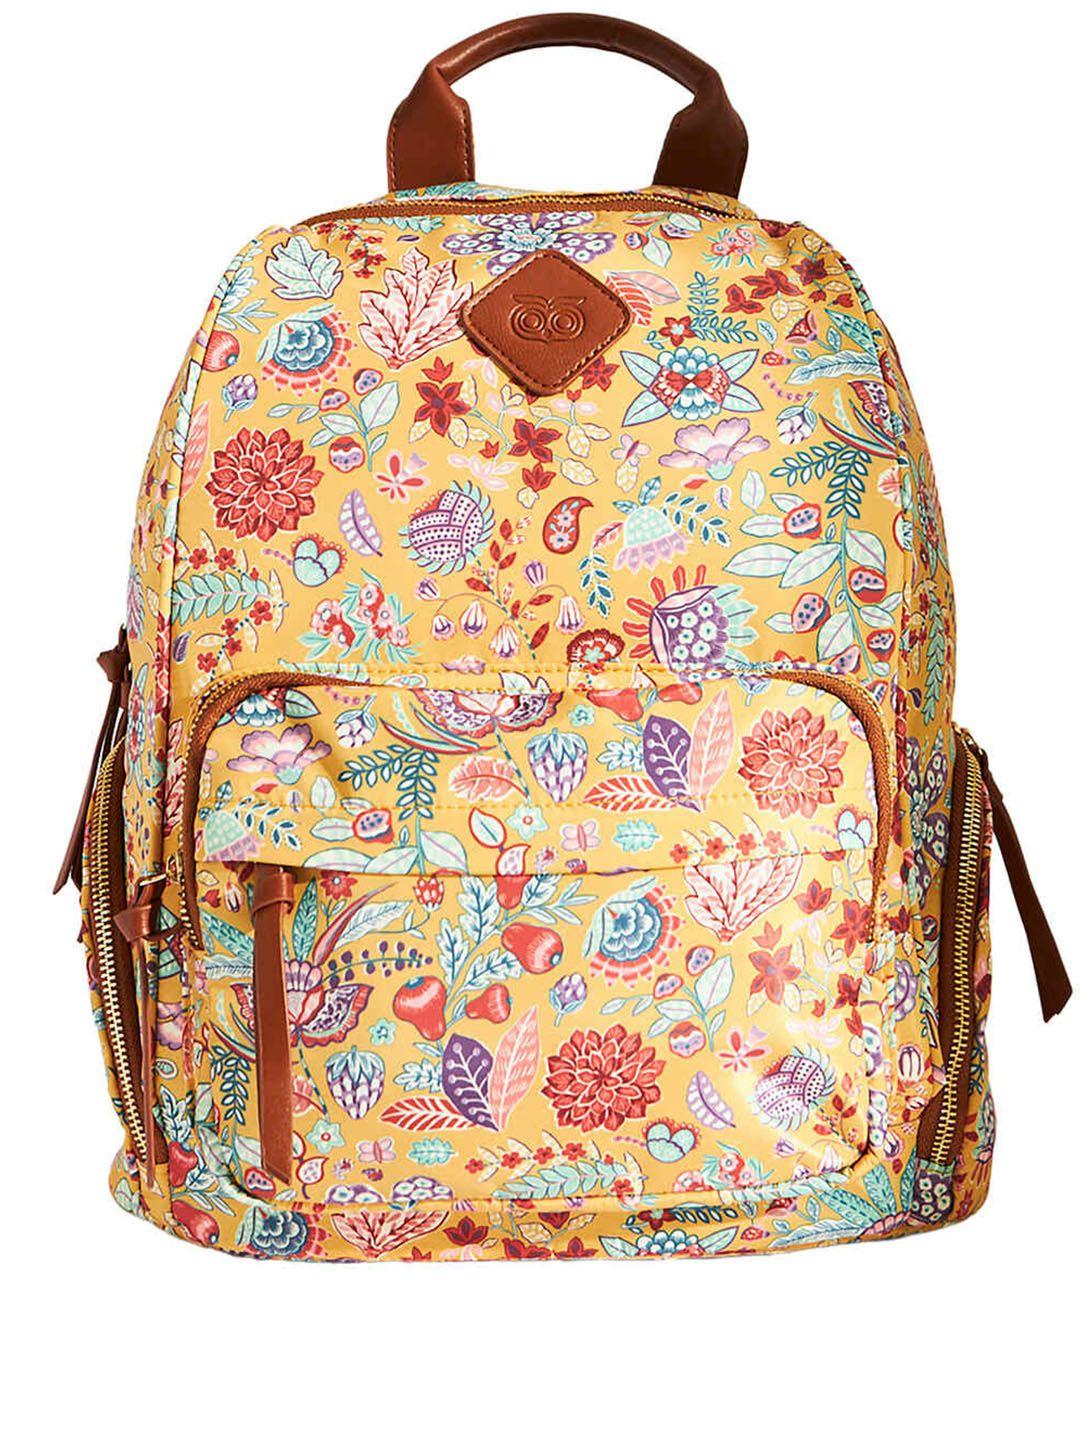 chumbak unisex floral printed backpack up to 13 inch